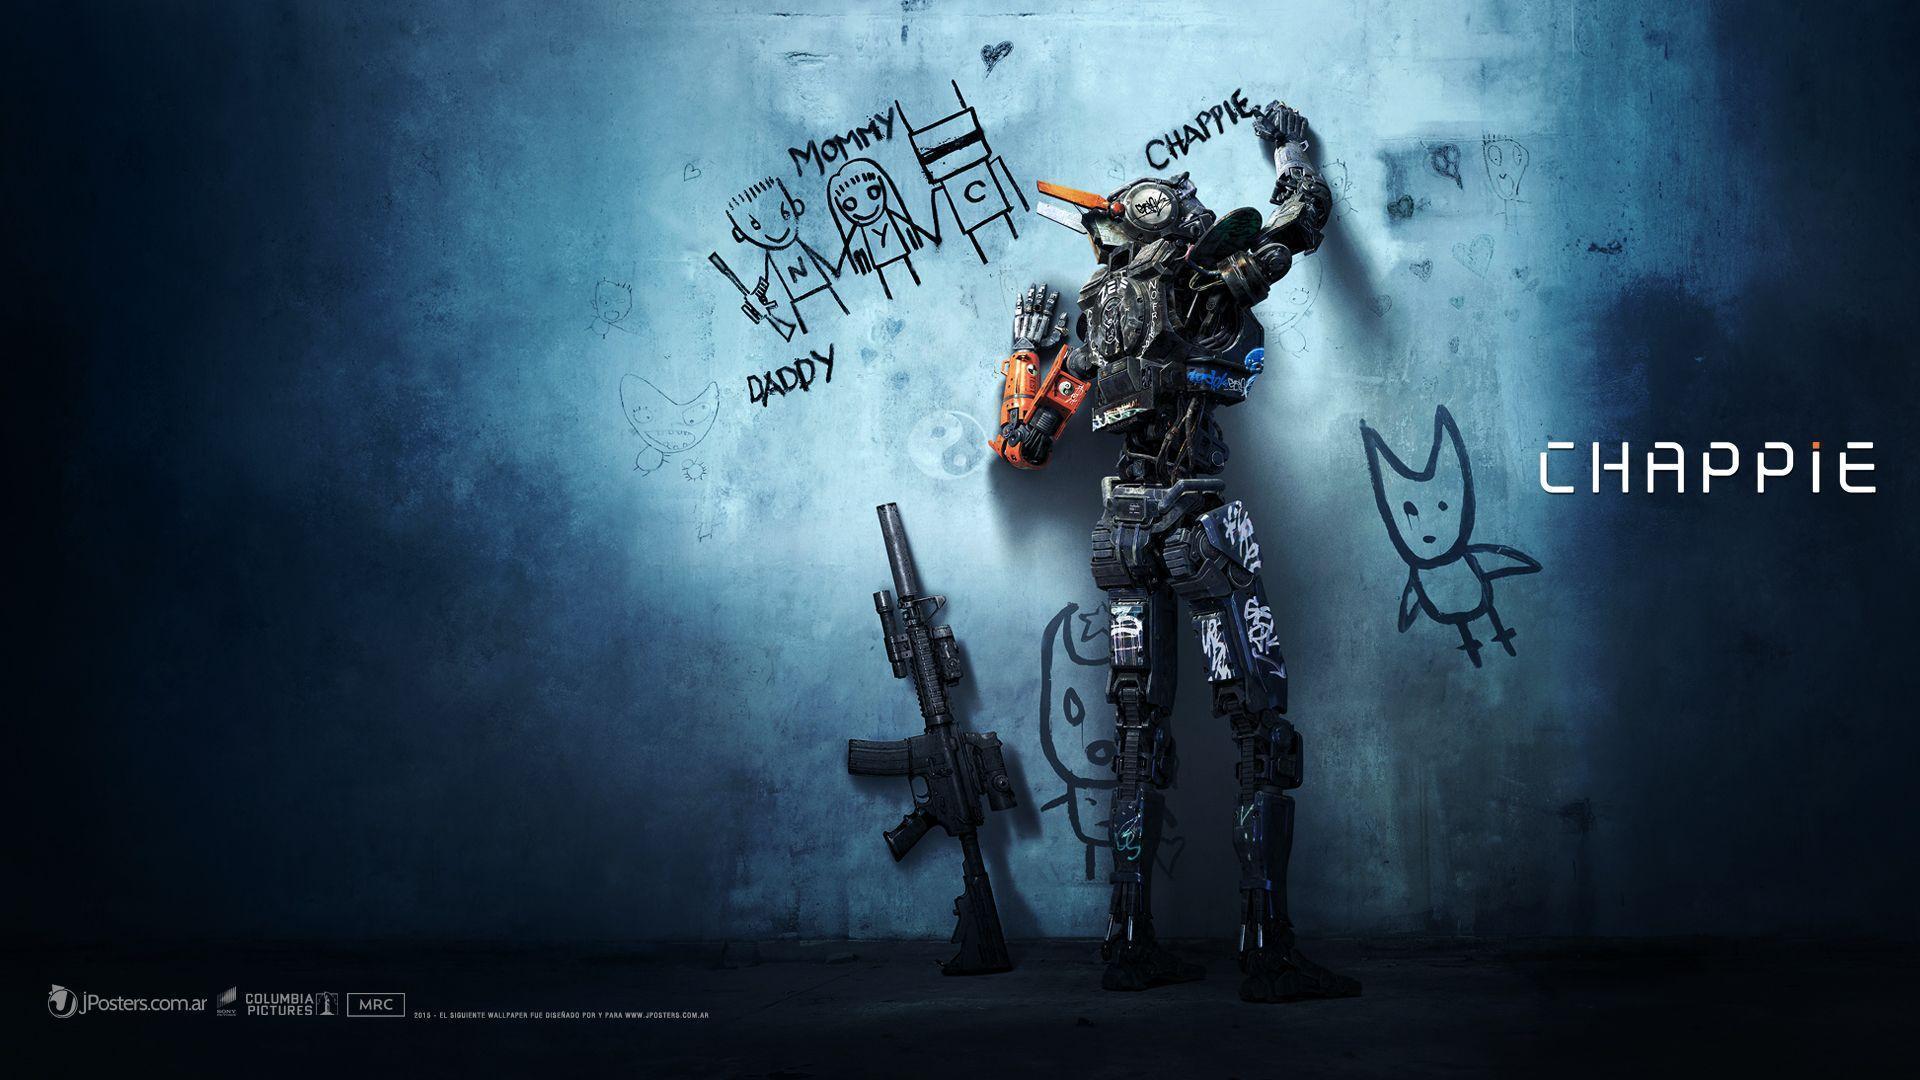 IK 30 Chappie Wallpaper, Chappie Full HD Picture and Wallpaper